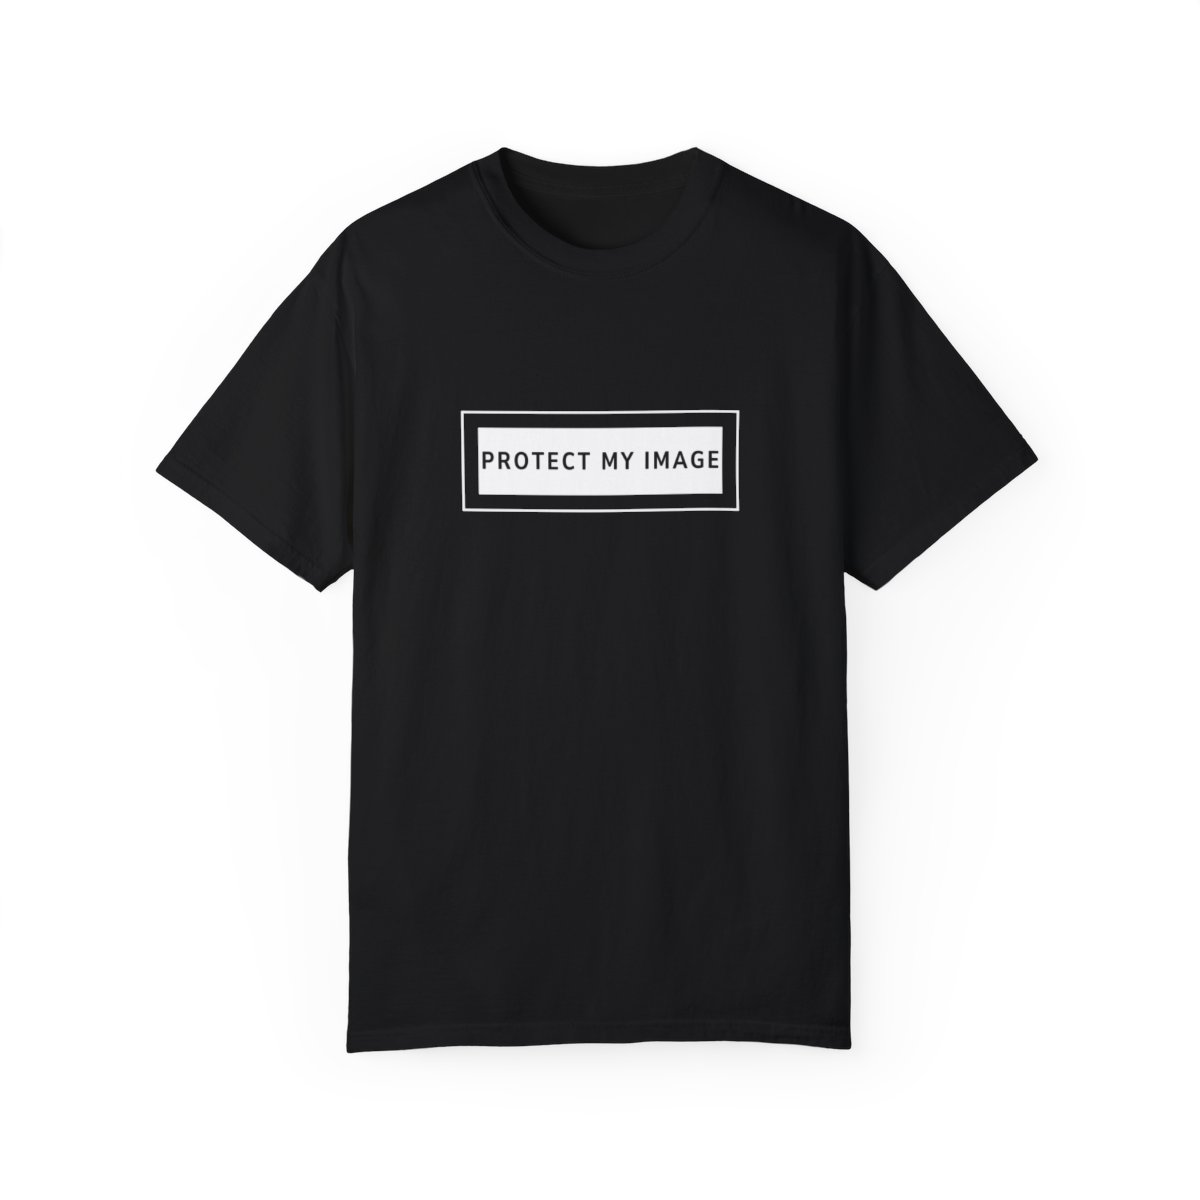 Protect My Image White Letters Garment-Dyed T-shirt